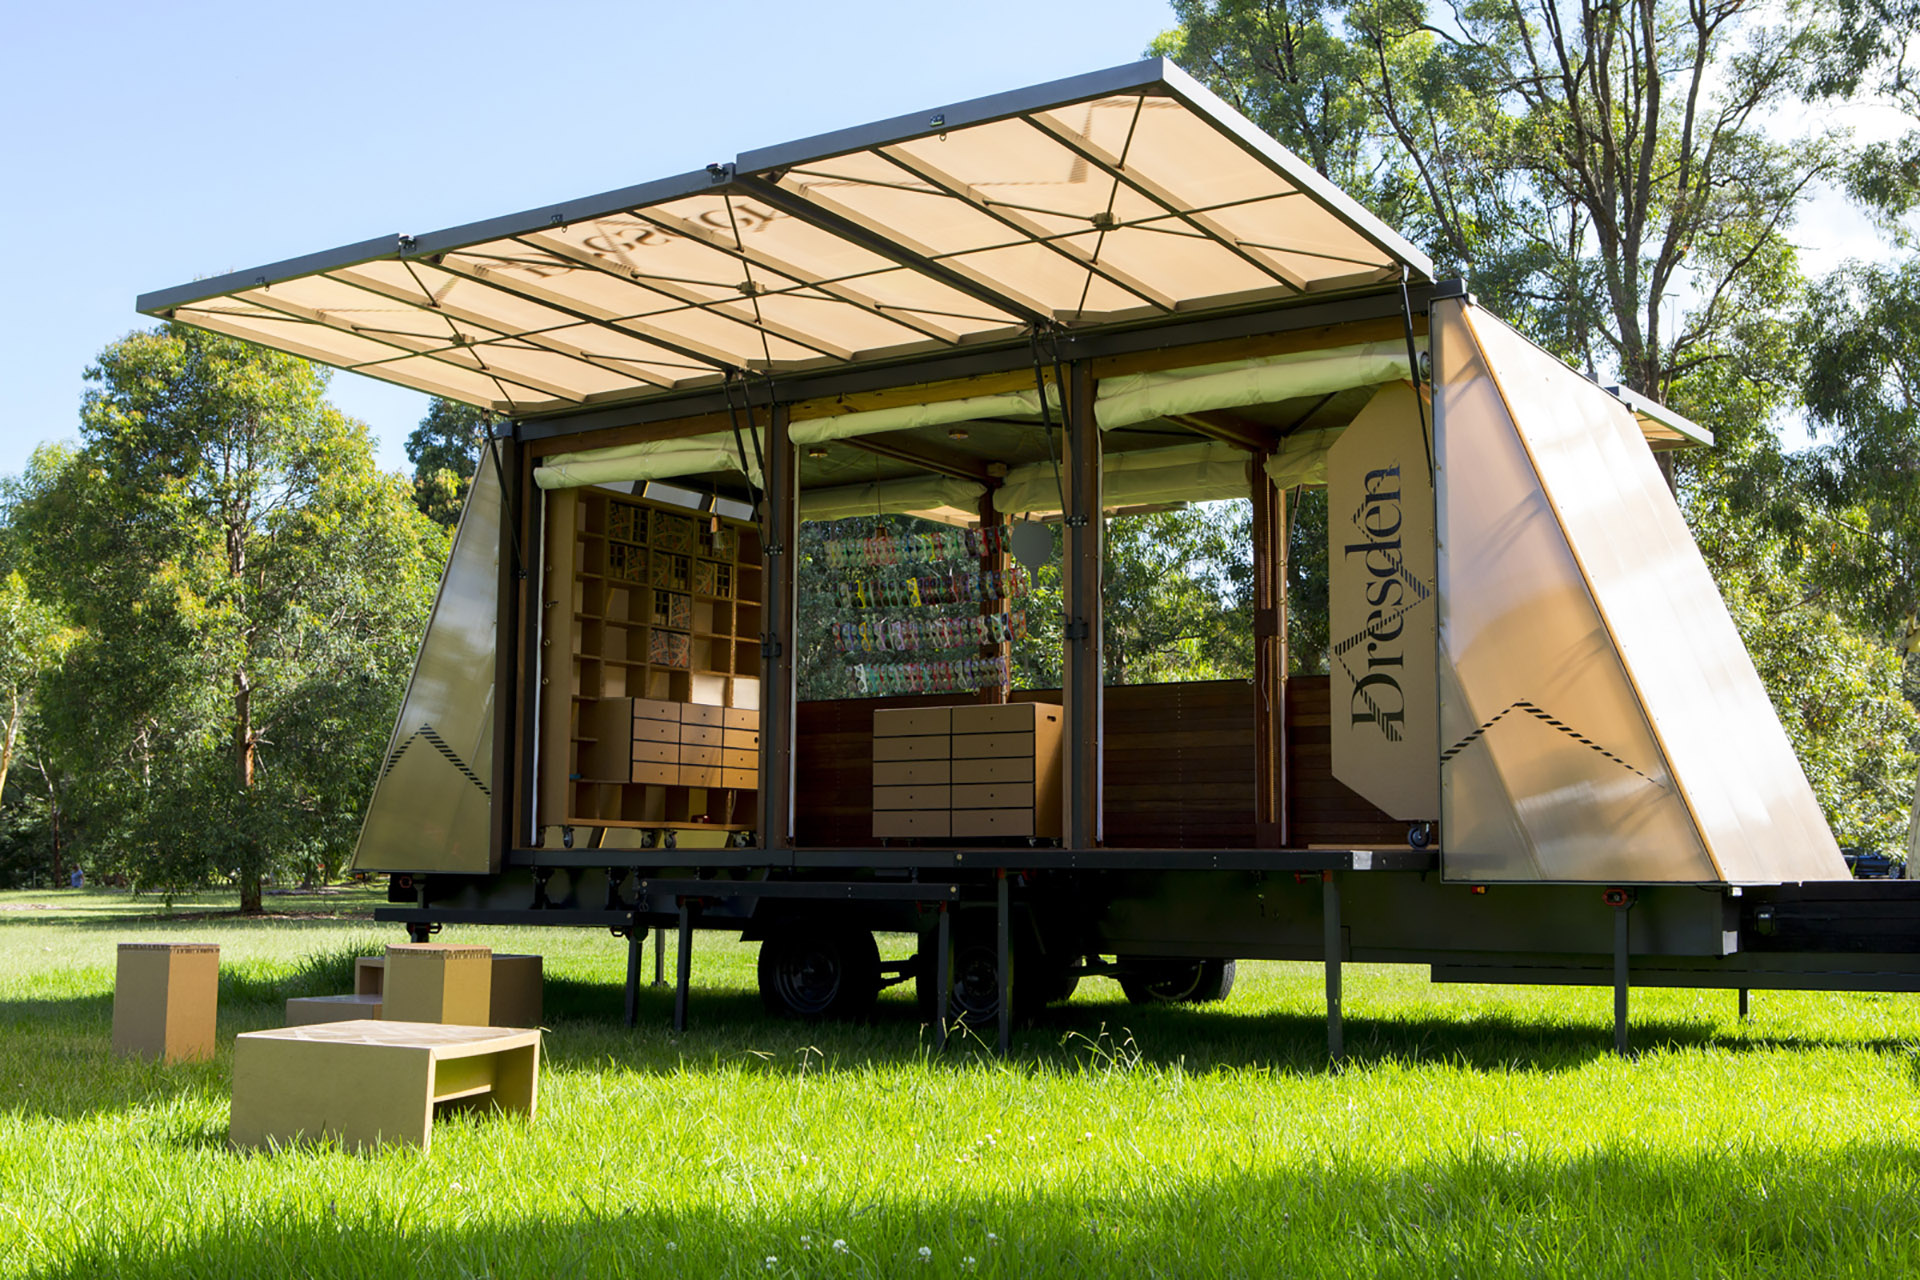 Dresden Mobile. A mobile store that embodies the values and ethics of today's society